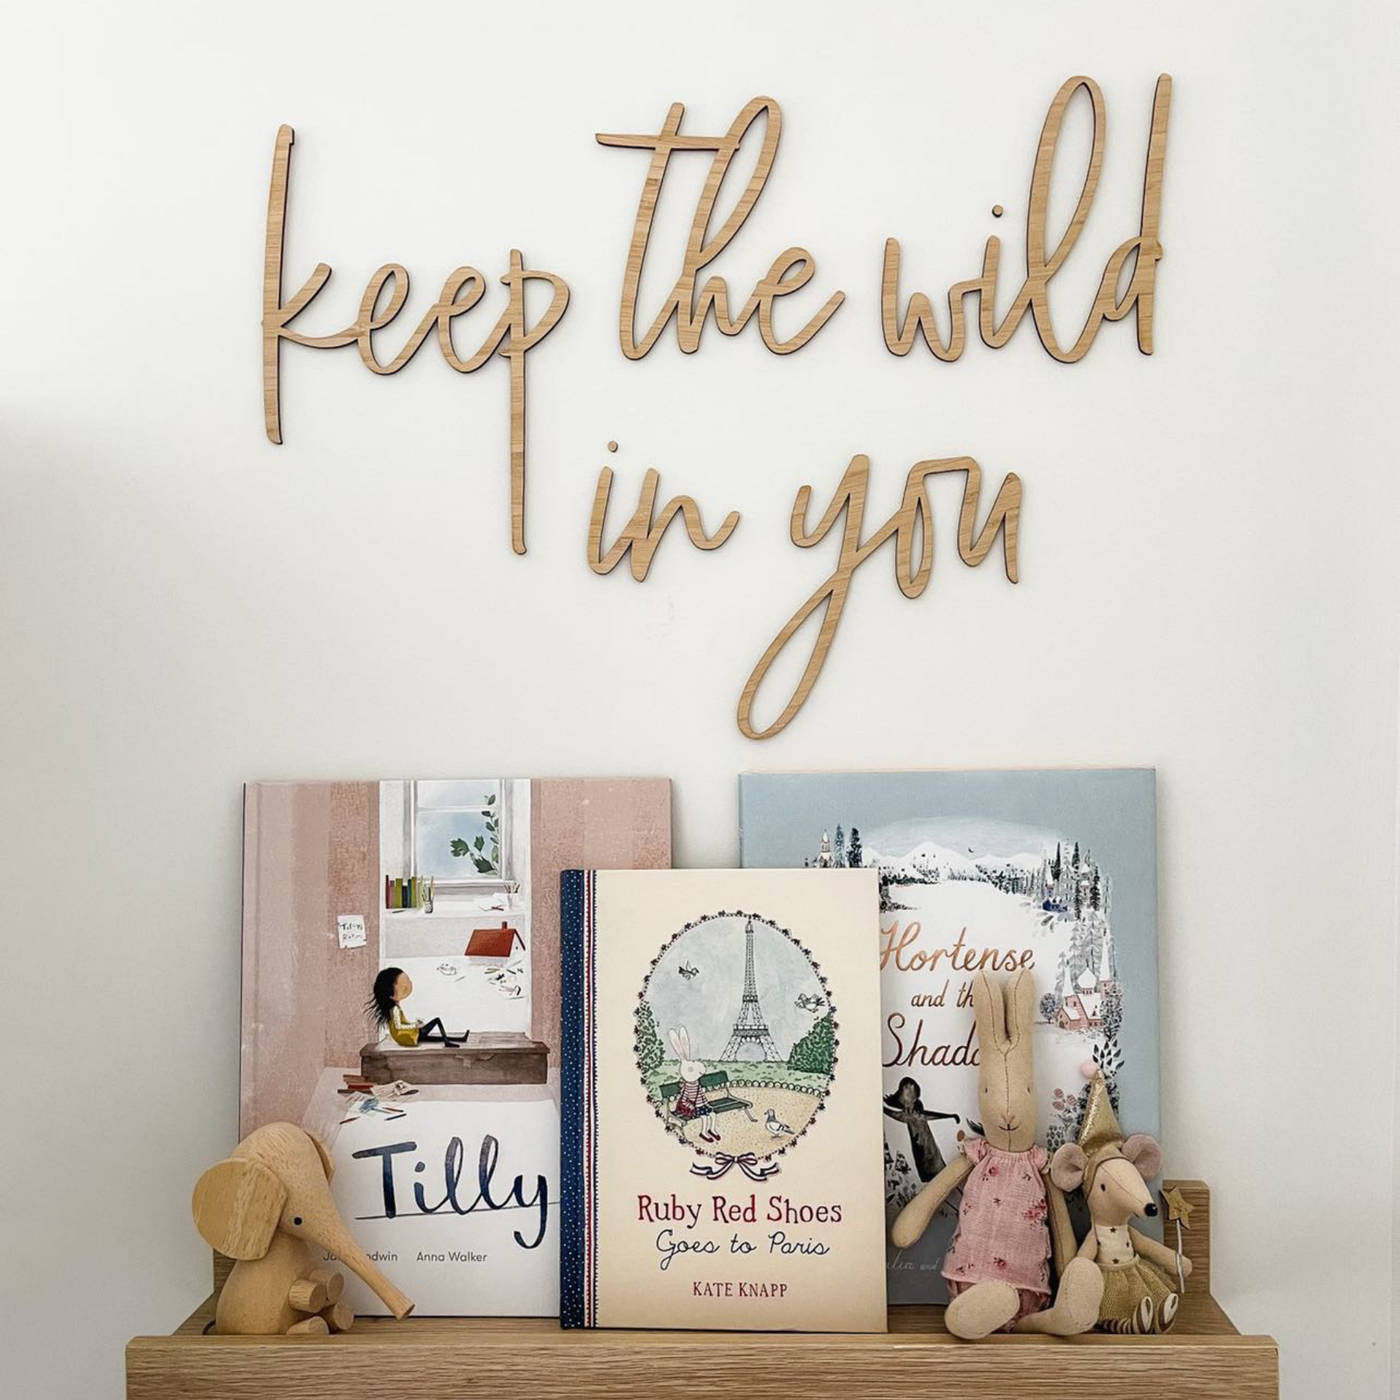 Keep the Wild in You